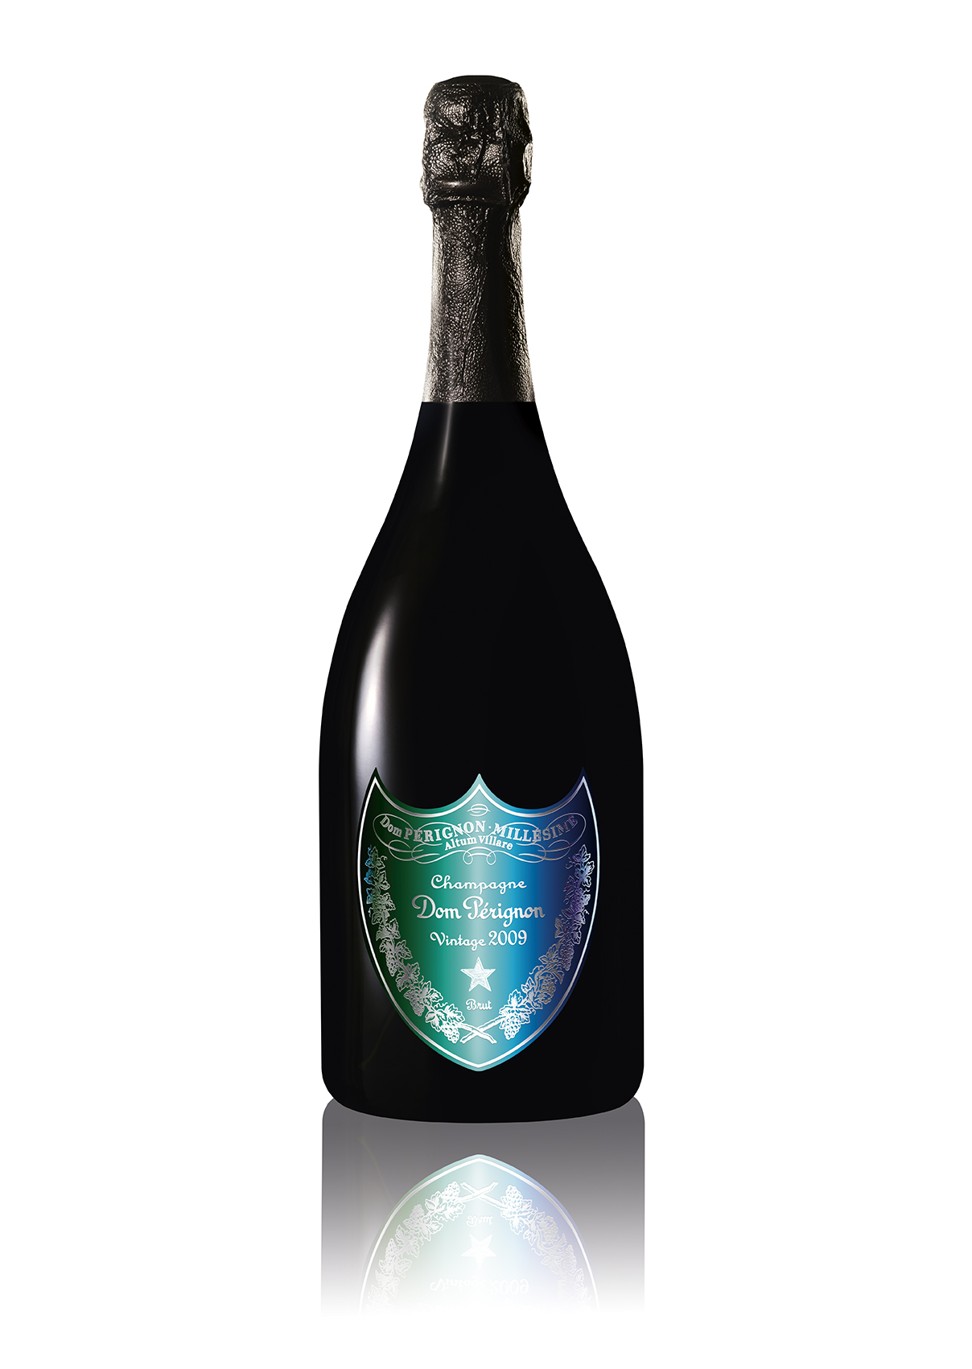 Dom Pérignon Releases Elusive Bottle From One Of The Most